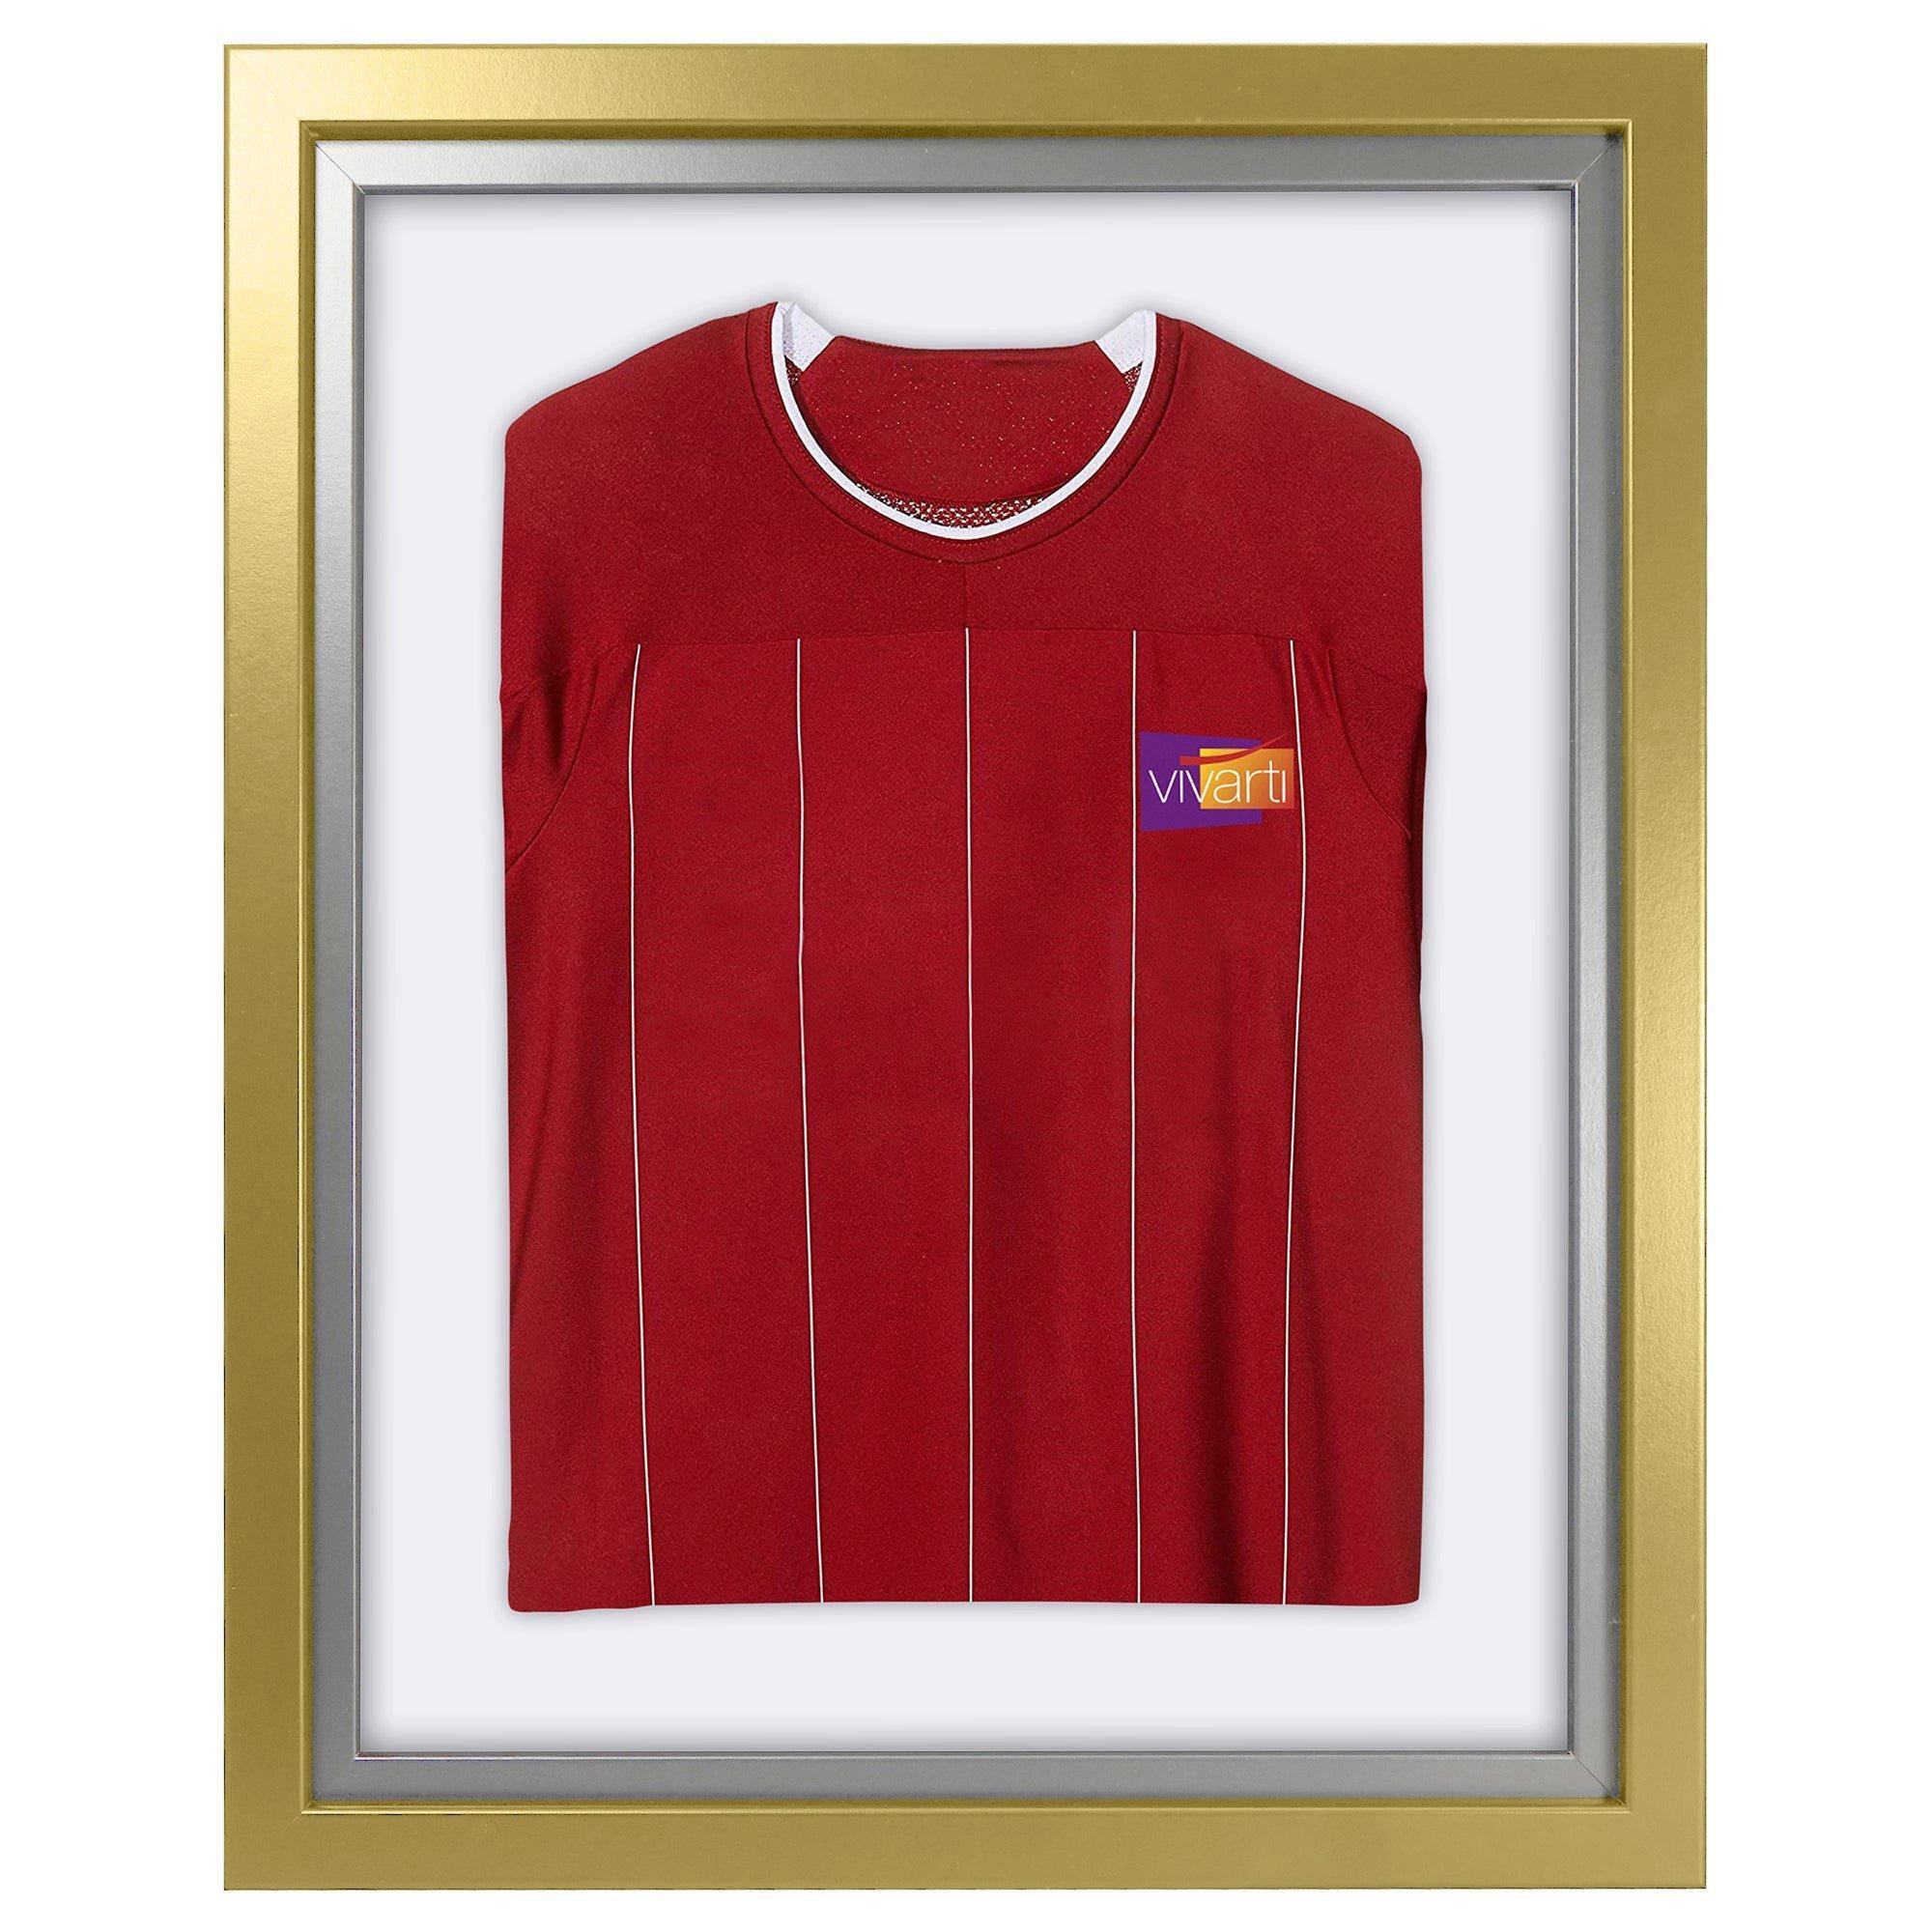 Infant Standard Mounted Sports Shirt Display Frame with Gold Frame and Silver Inner Frame 40 x 50cm - image 1